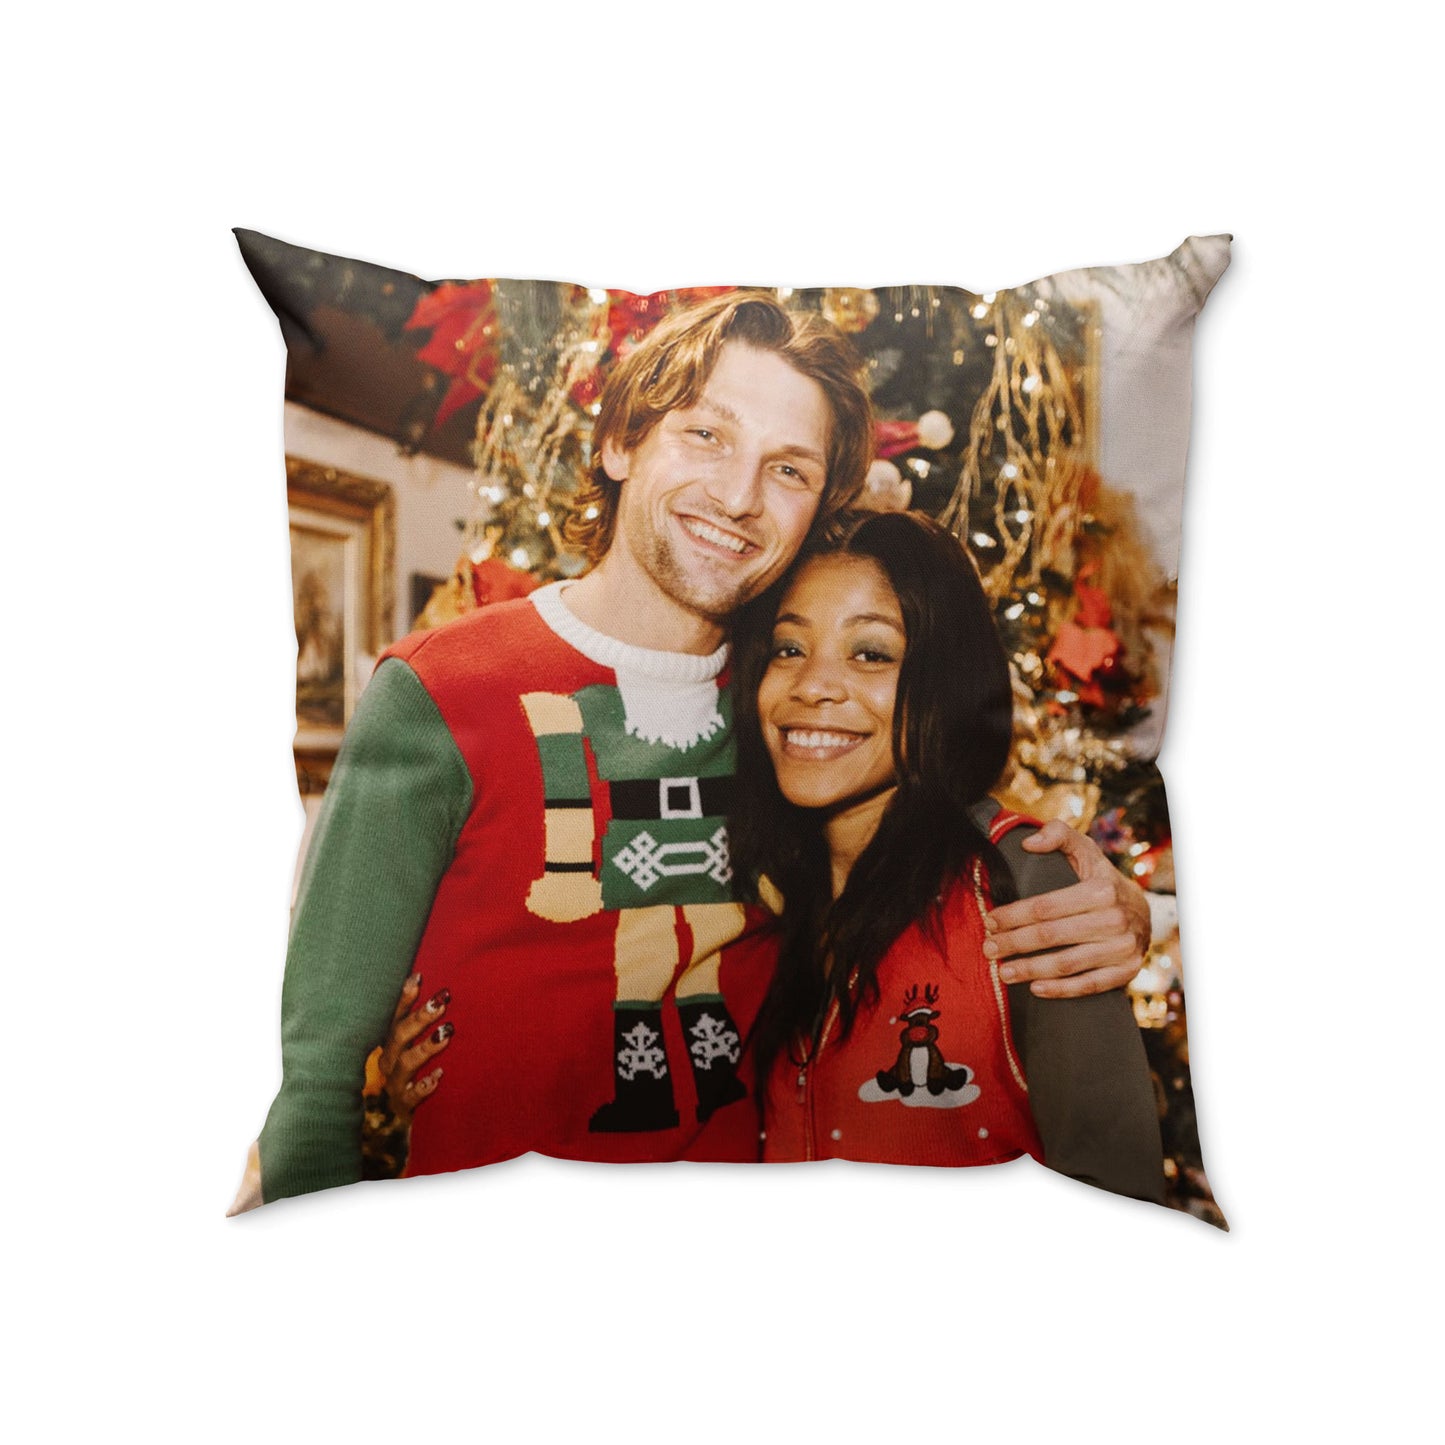 DIY Photo Personalized Pillow, Memorial Customized Pillow, Decorative Pet/Dog/Cat Custom Throw Pillows for Couch and Sofa